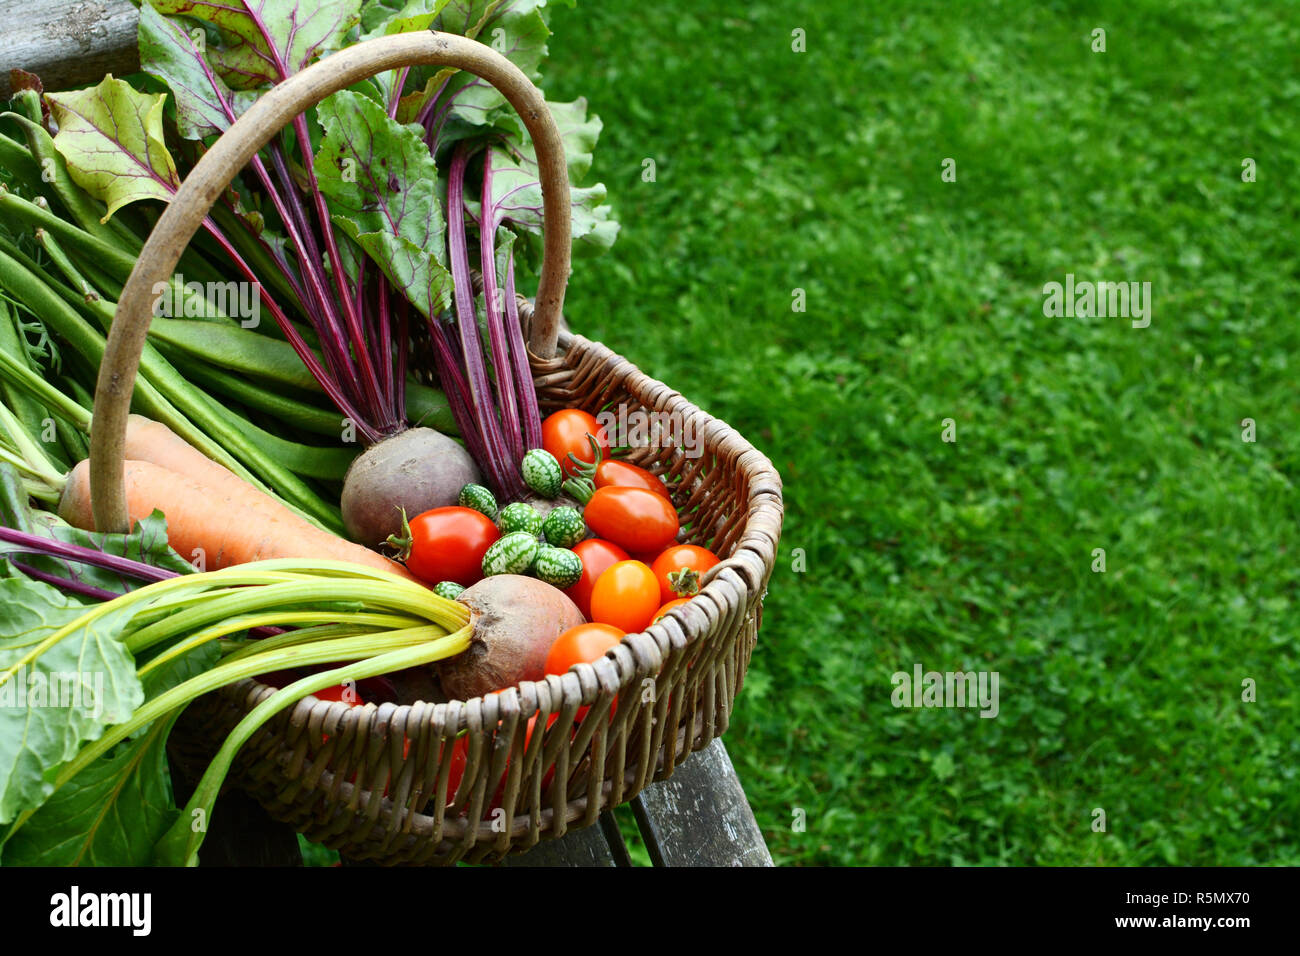 Woven basket filled with freshly harvested vegetables from an allotment Stock Photo